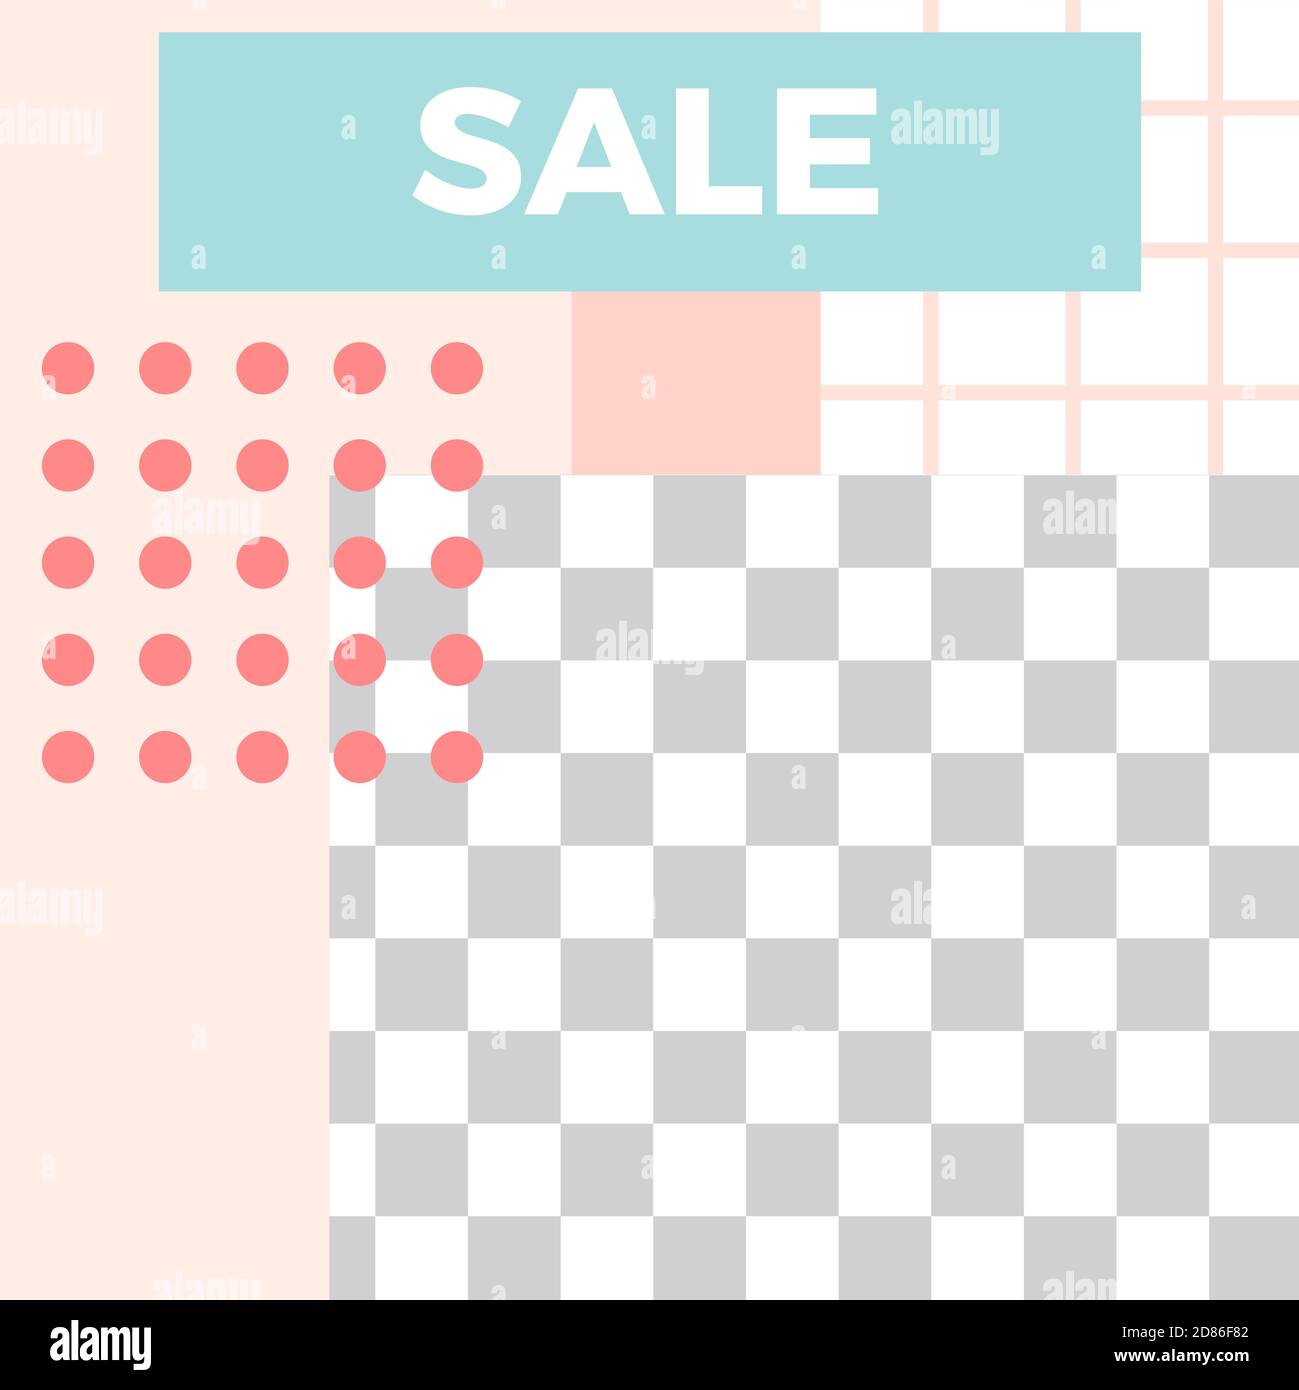 Memphis style post. Trendy abstract sale social media post template Stock Vector